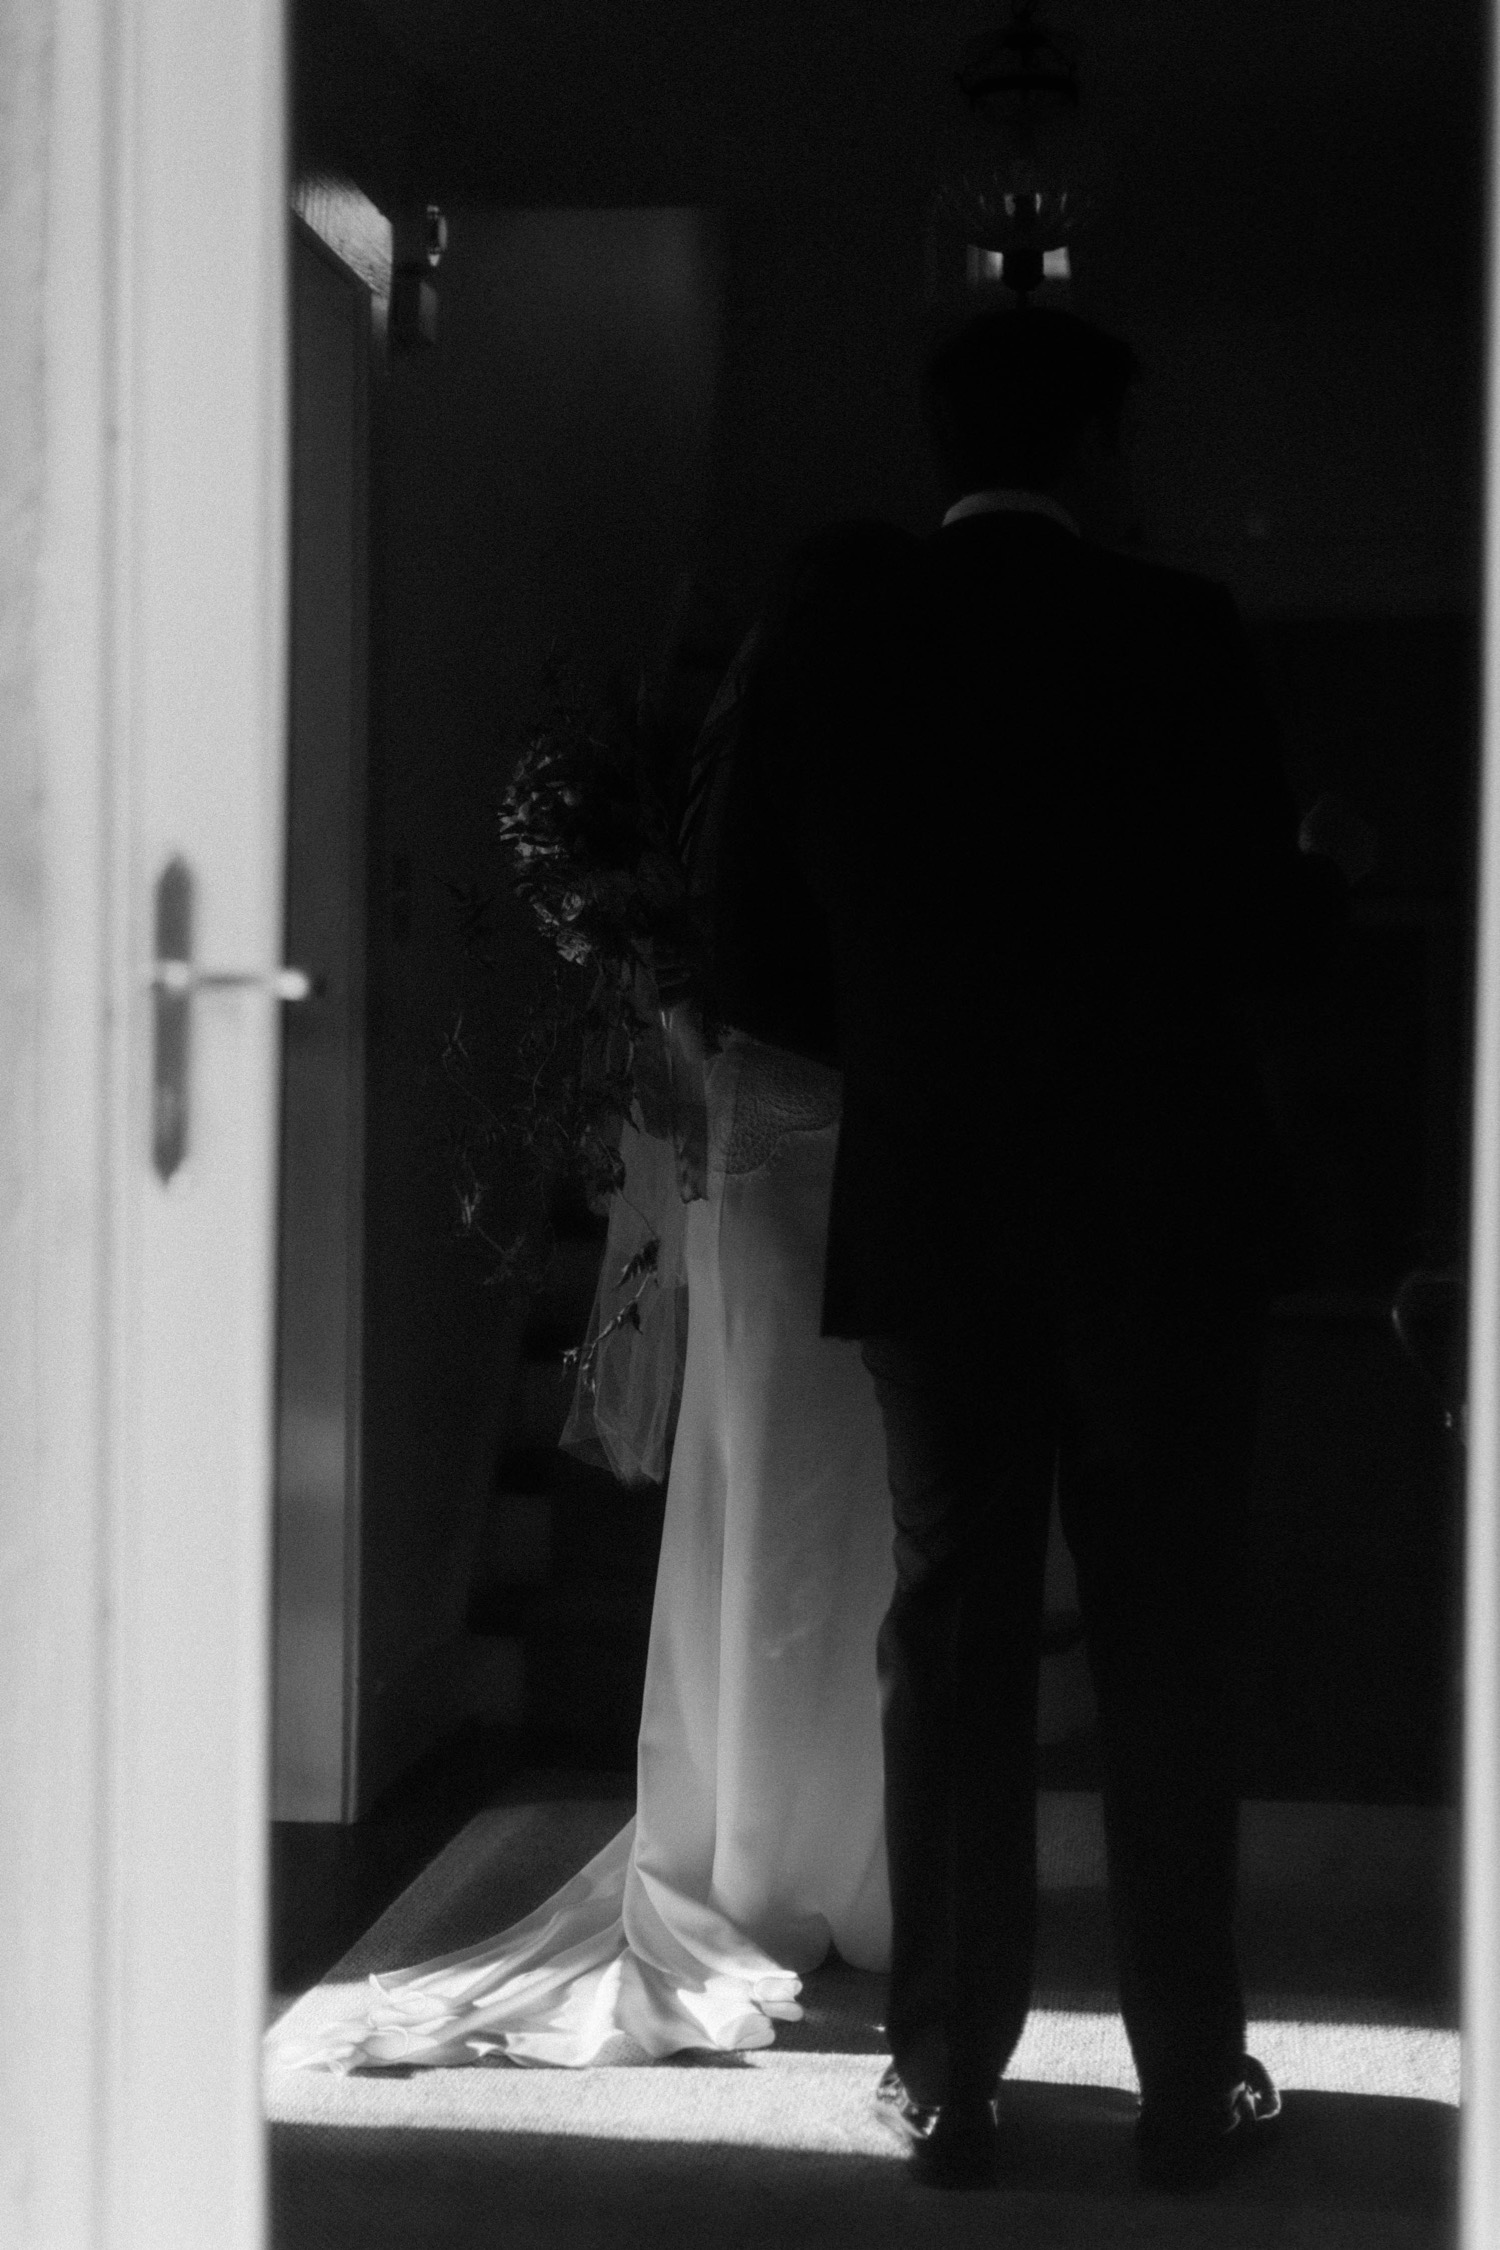 shadowy silhouette bride and groom